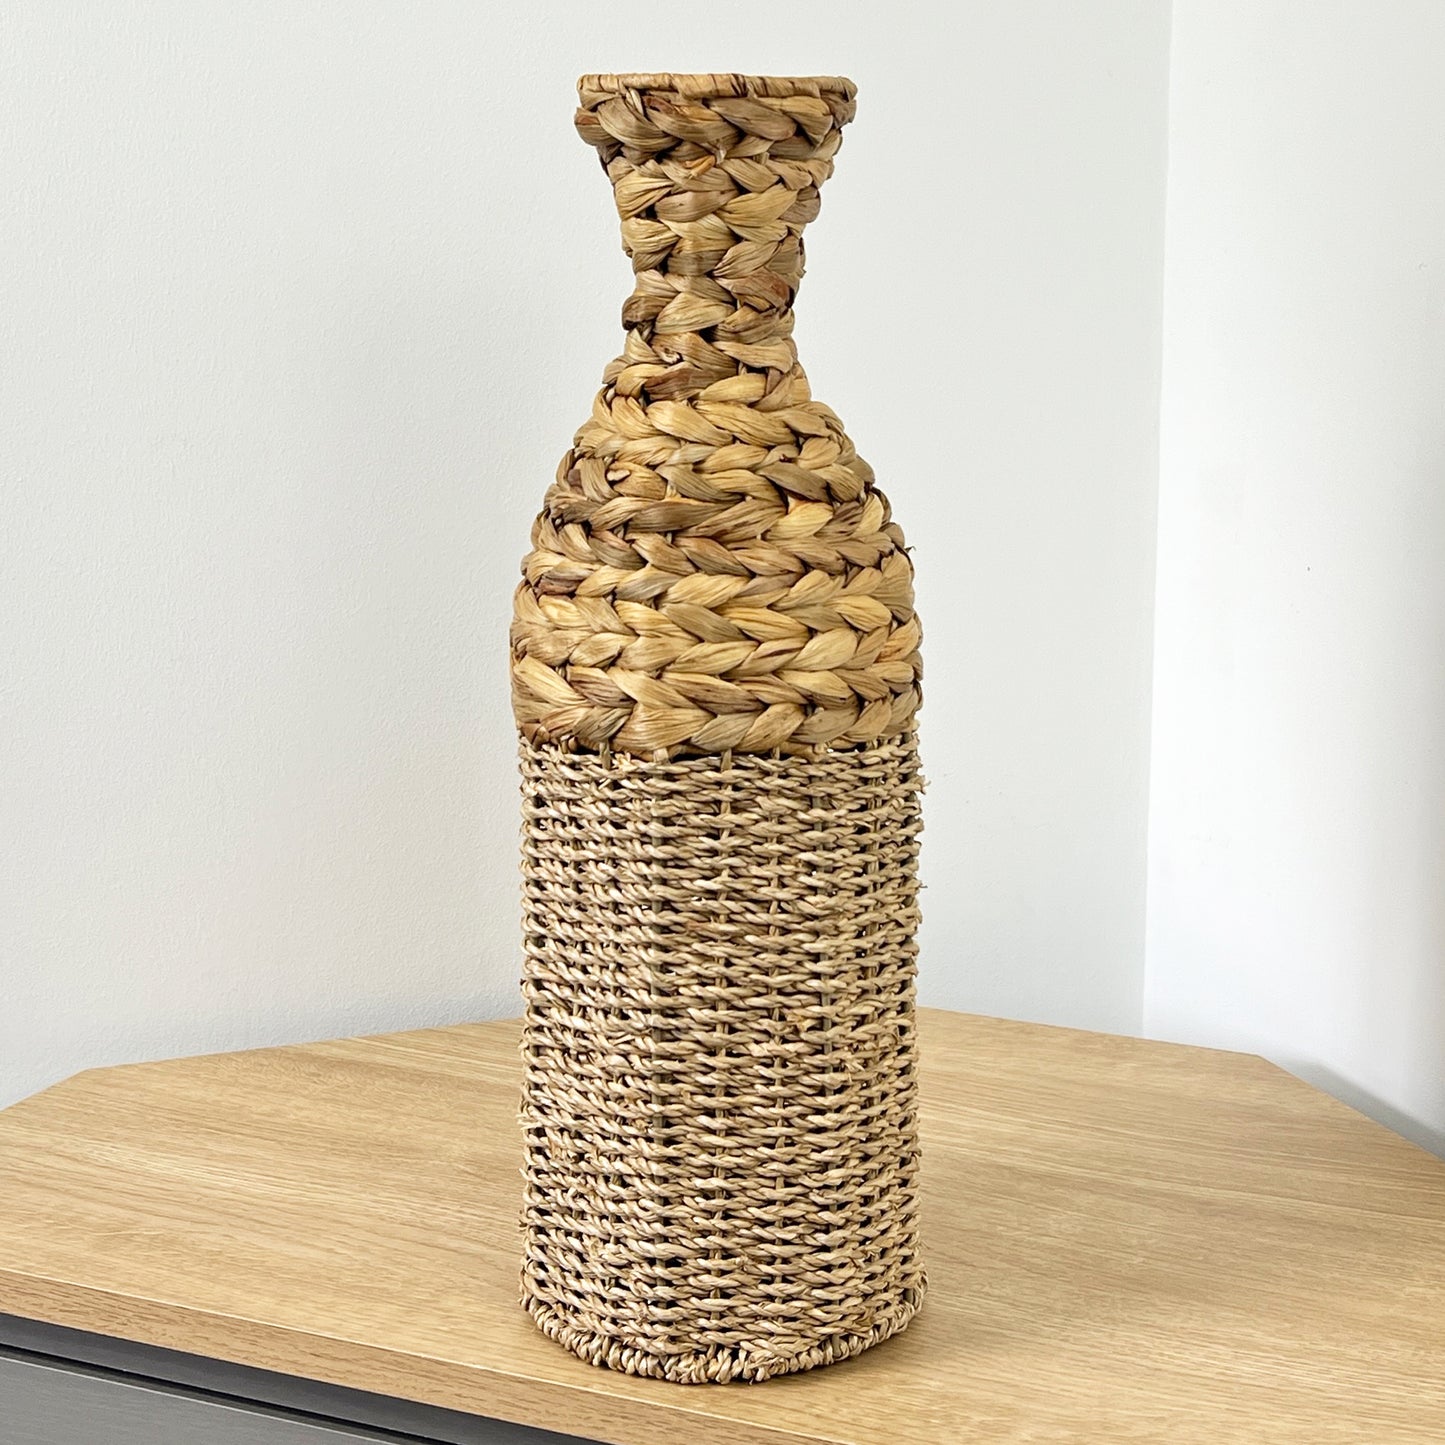 Large Woven Seagrass Vase